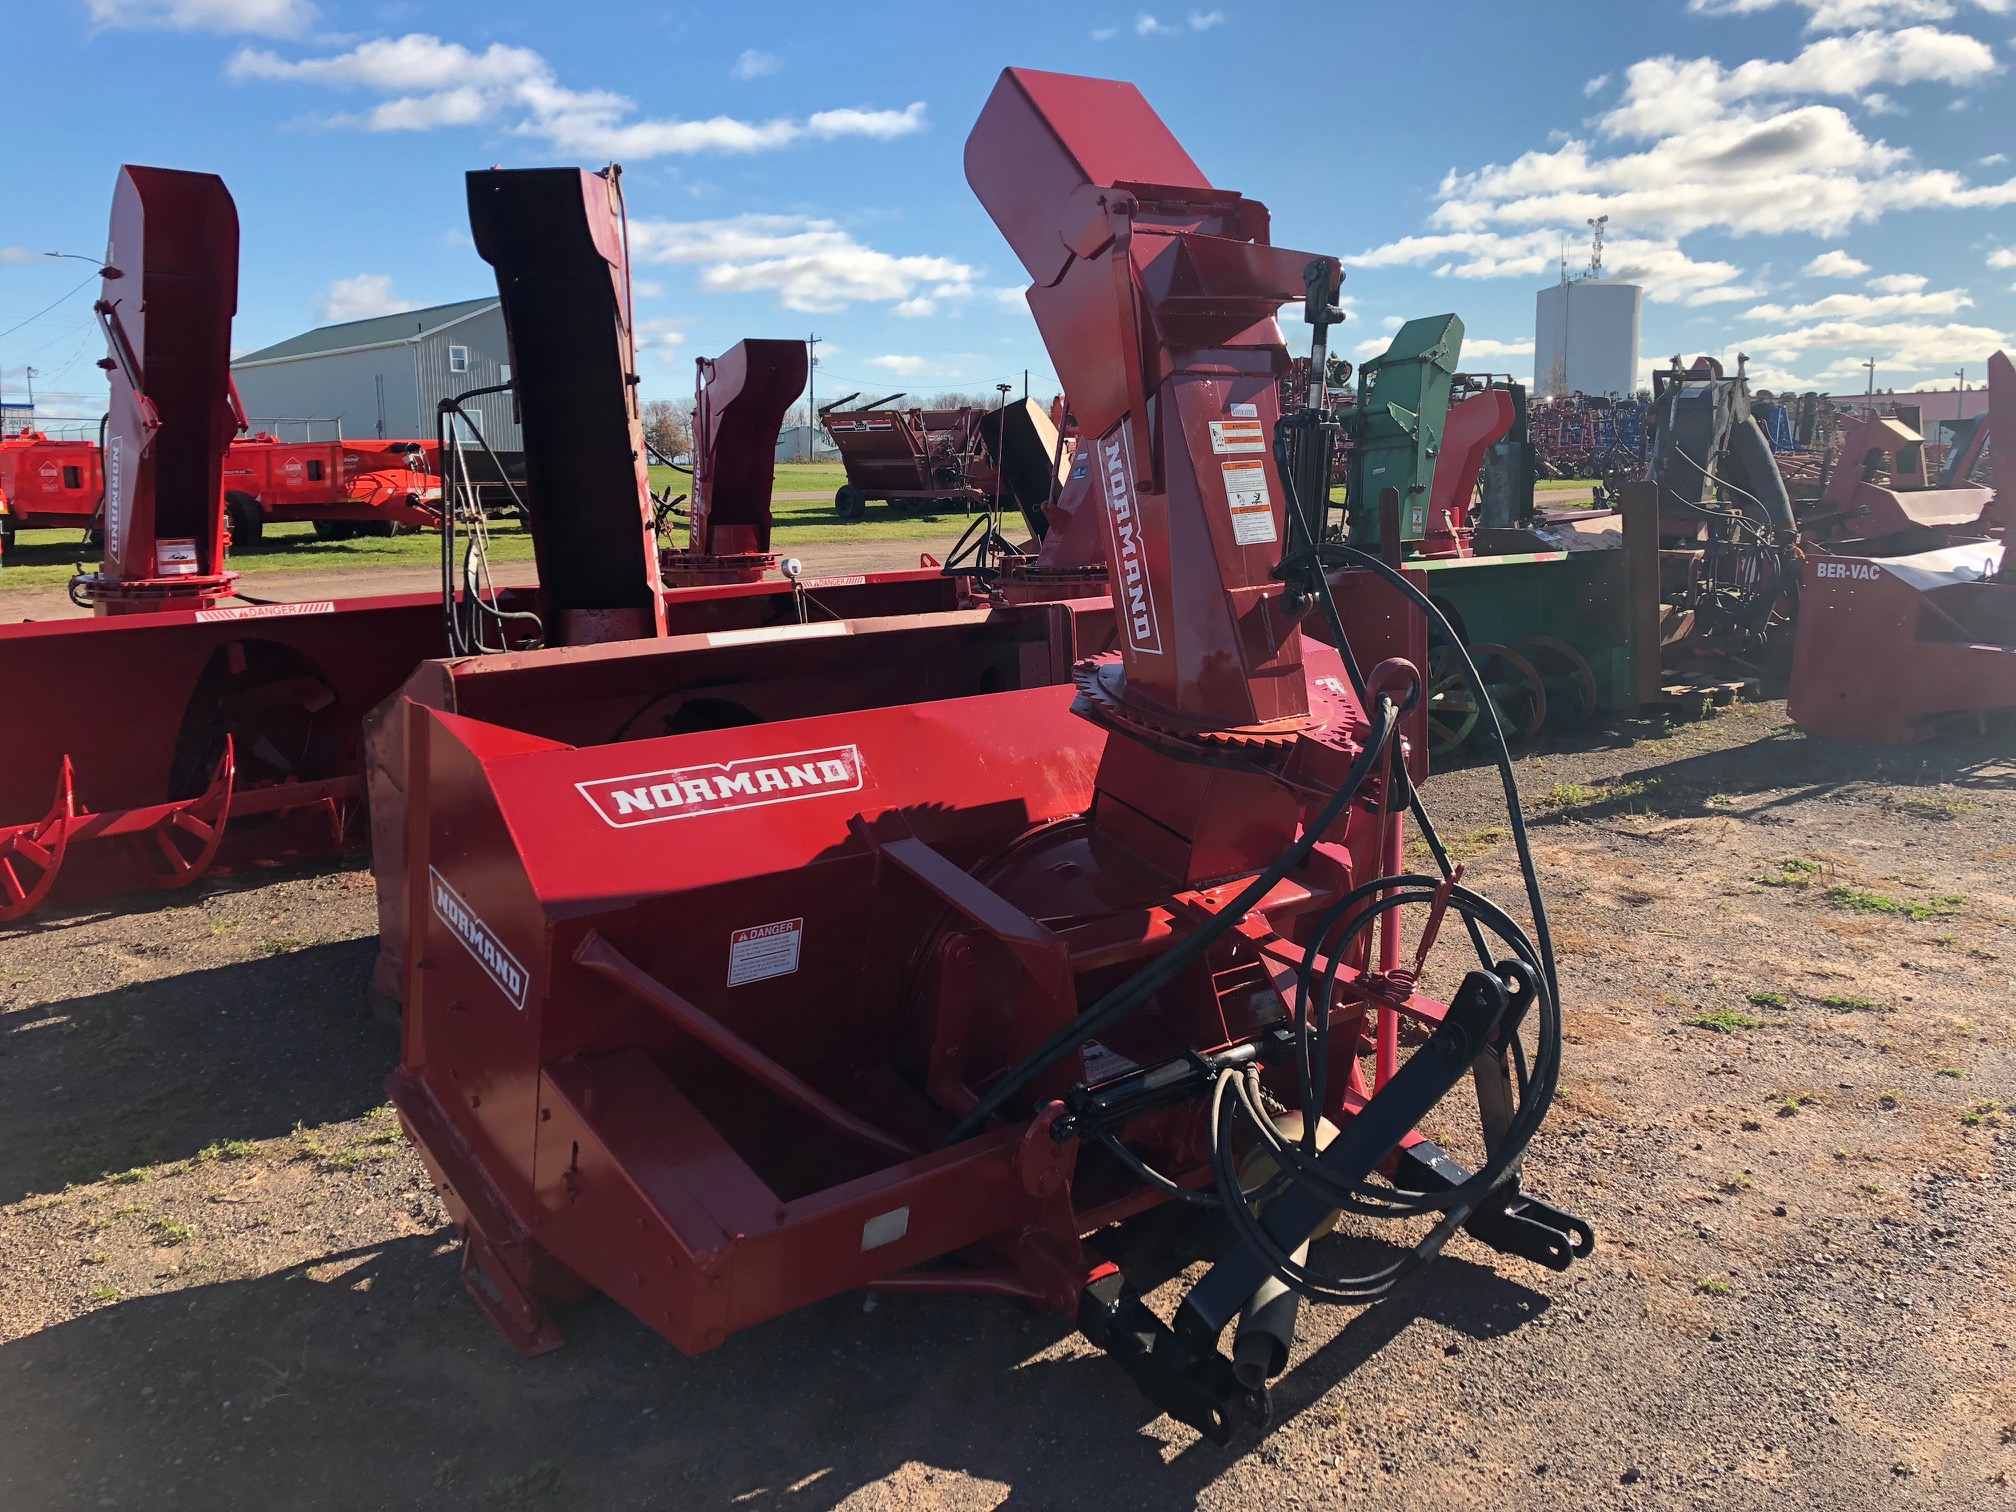 Normand N92-280TR Snow Blower